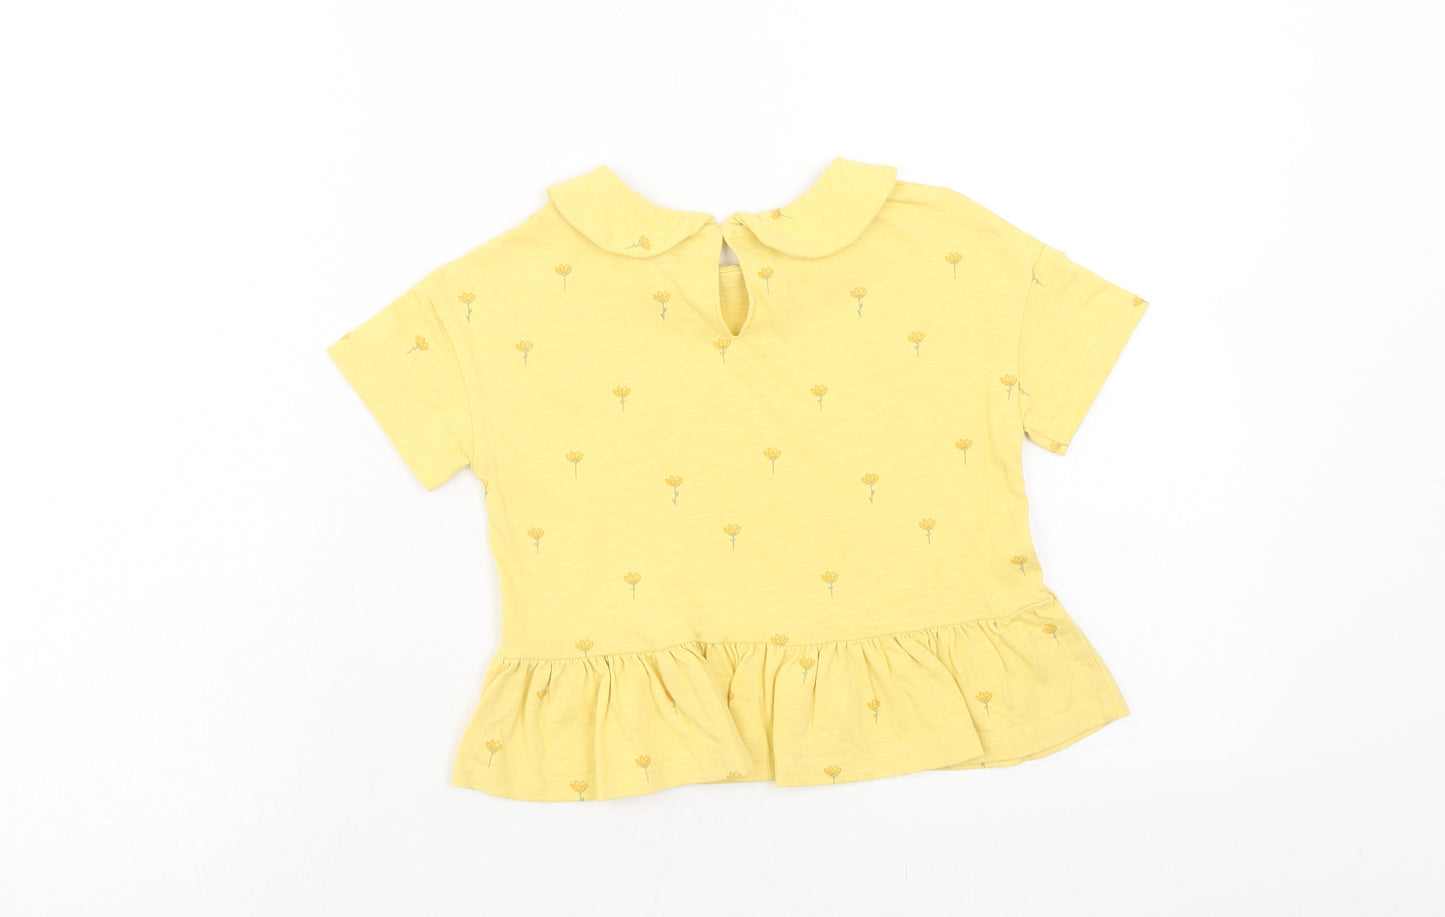 NEXT Girls Yellow Floral Cotton Basic T-Shirt Size 3-4 Years Collared Button